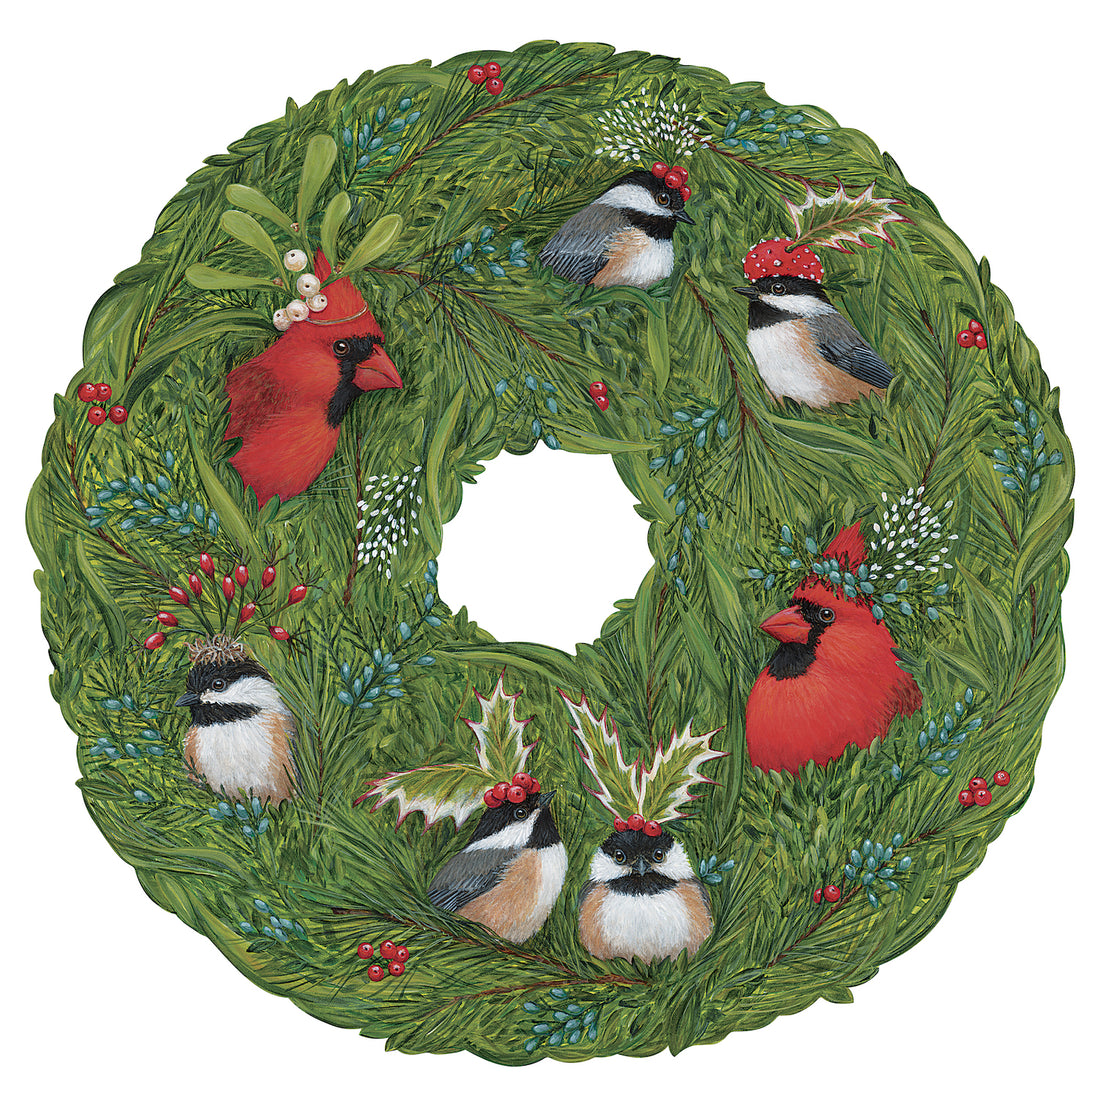 A die-cut illustration of a green wreath packed with winter foliage, holding seven songbirds with floral headdresses.